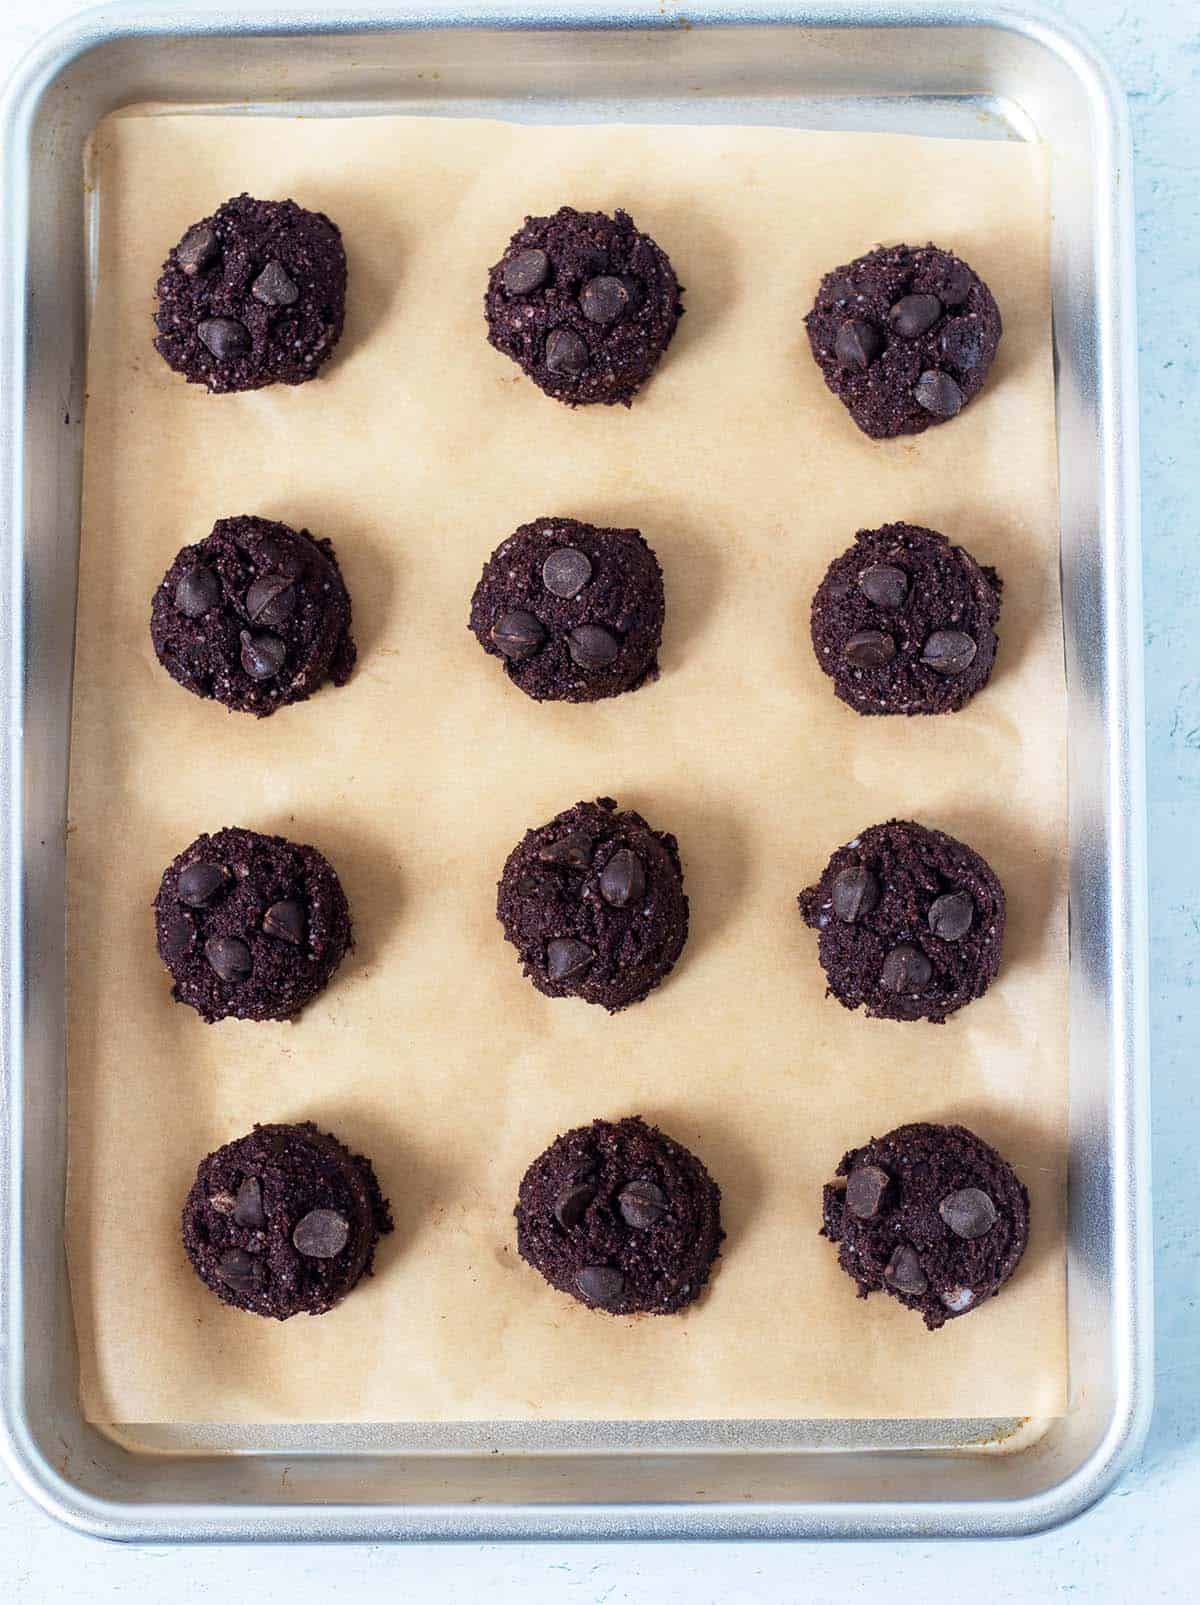 chocolate coconut flour cookies recipe on baking pan prior to being baked topped with extra chocolate chips.